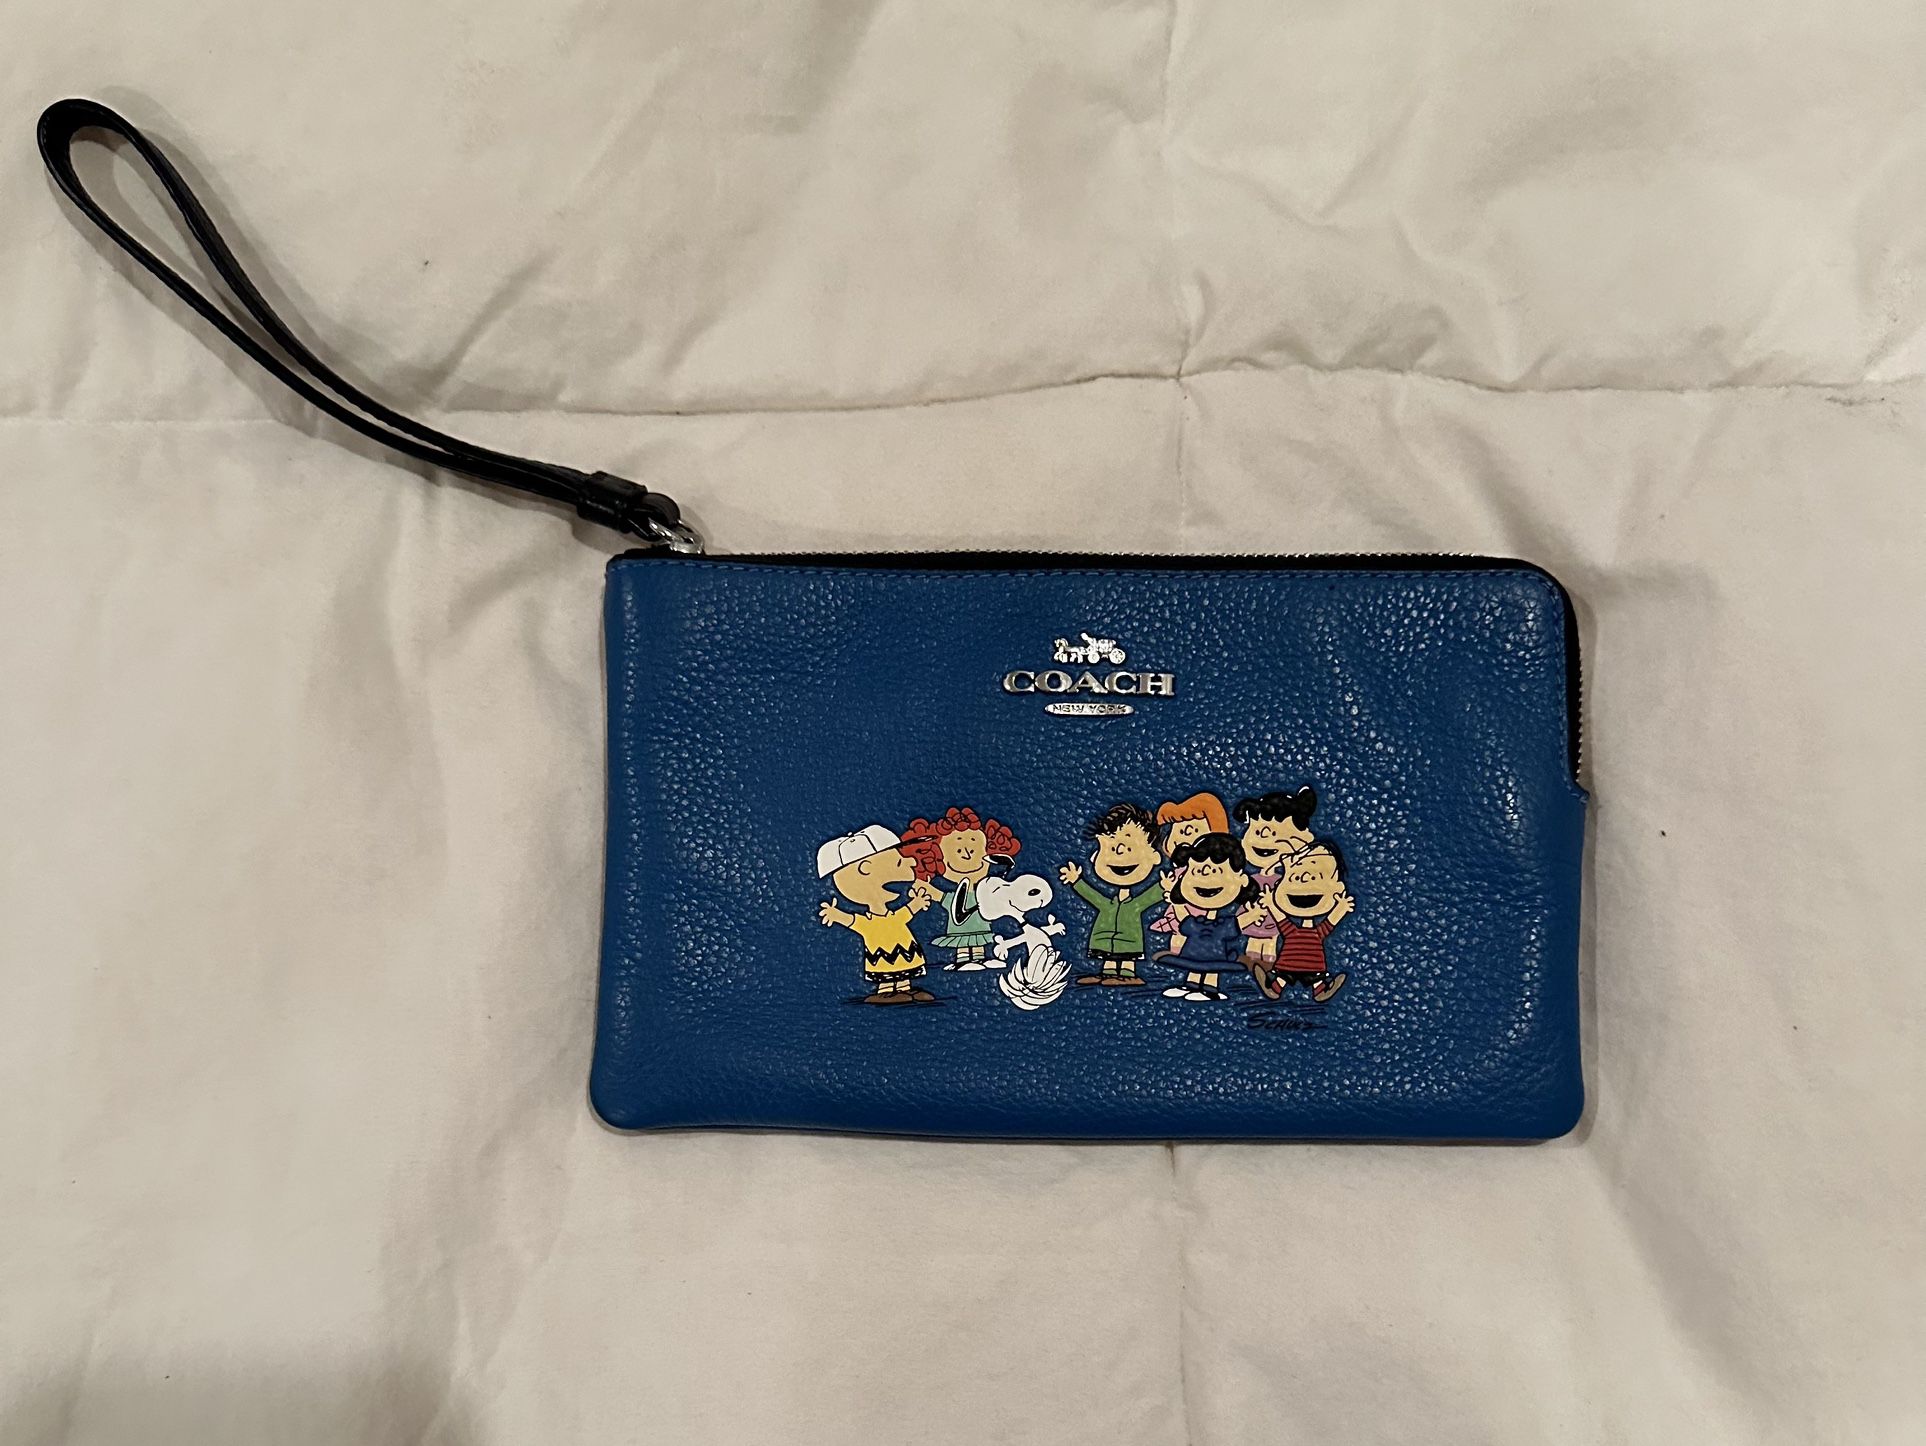 Coach X Peanuts Zip Wristlet With Snoopy And Friends 